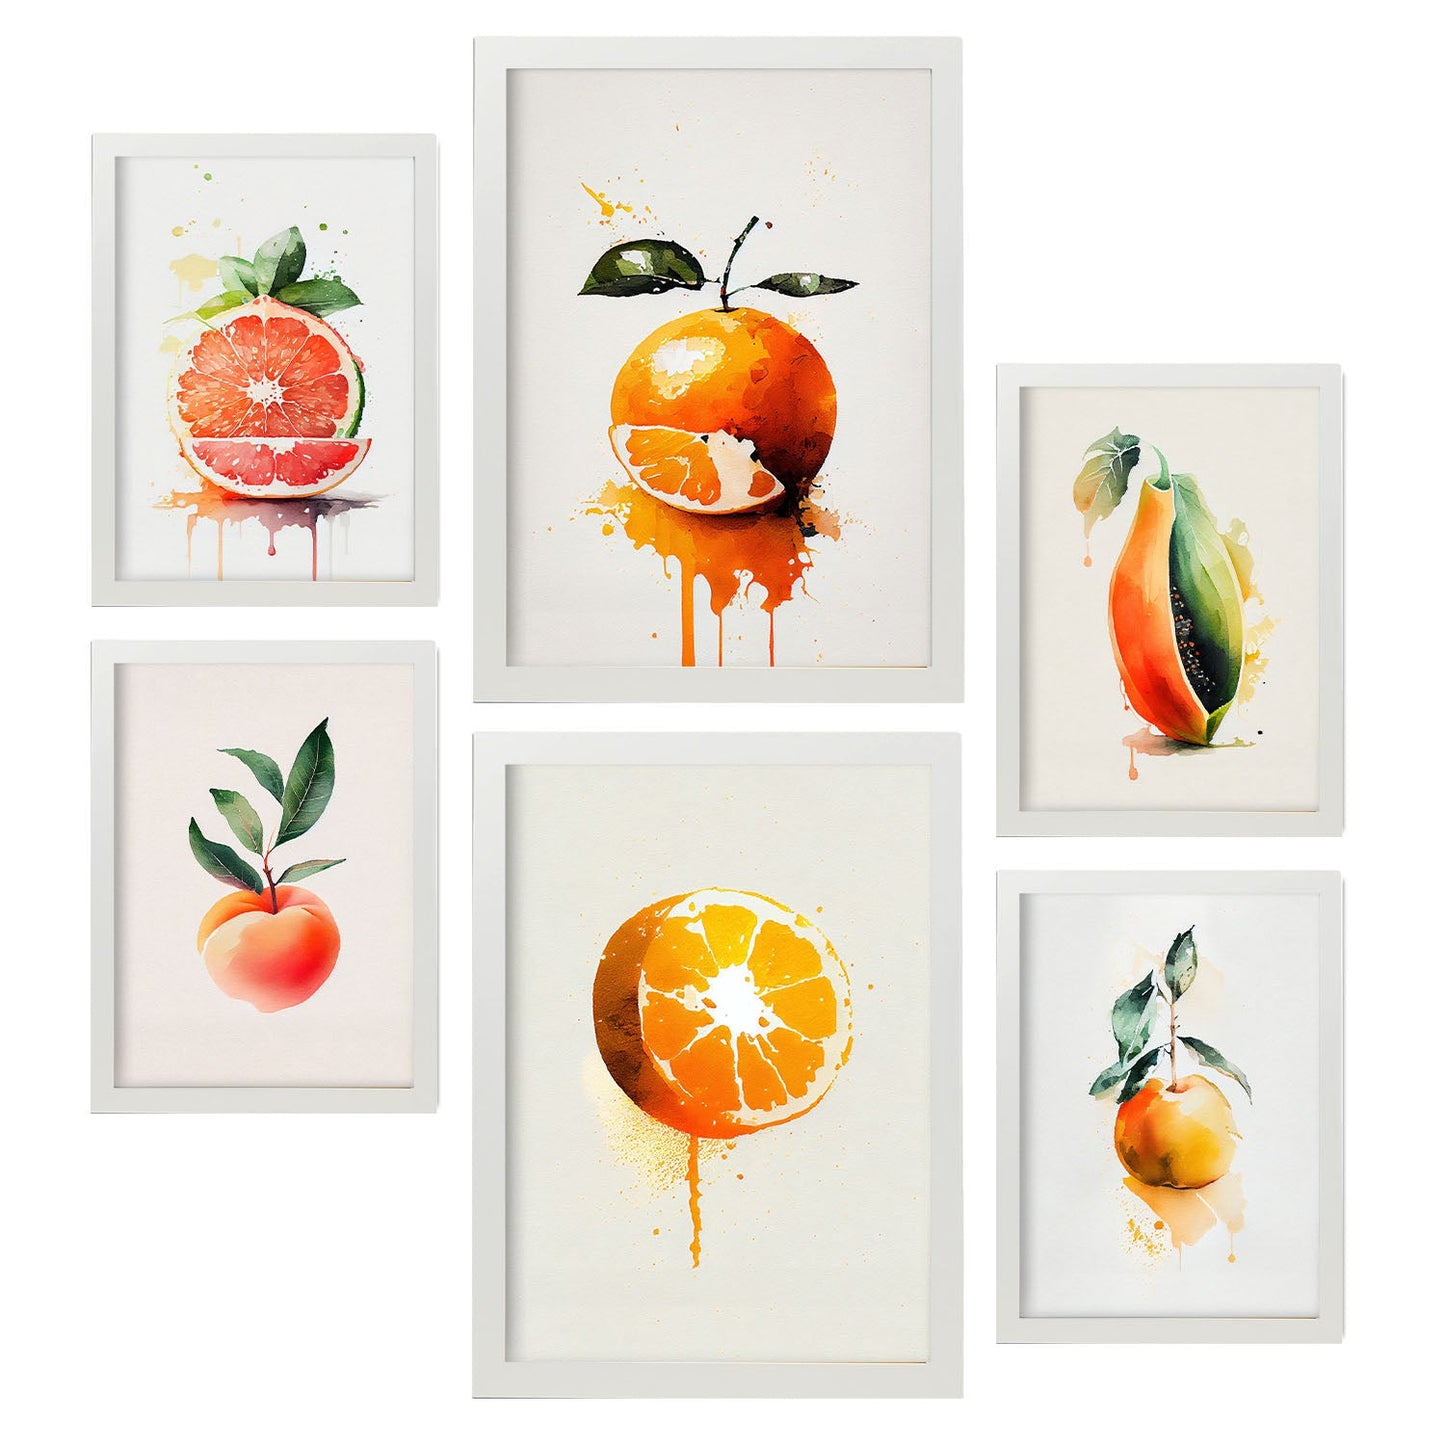 Nacnic Watercolor Fruits Set_10. Aesthetic Wall Art Prints for Bedroom or Living Room Design.